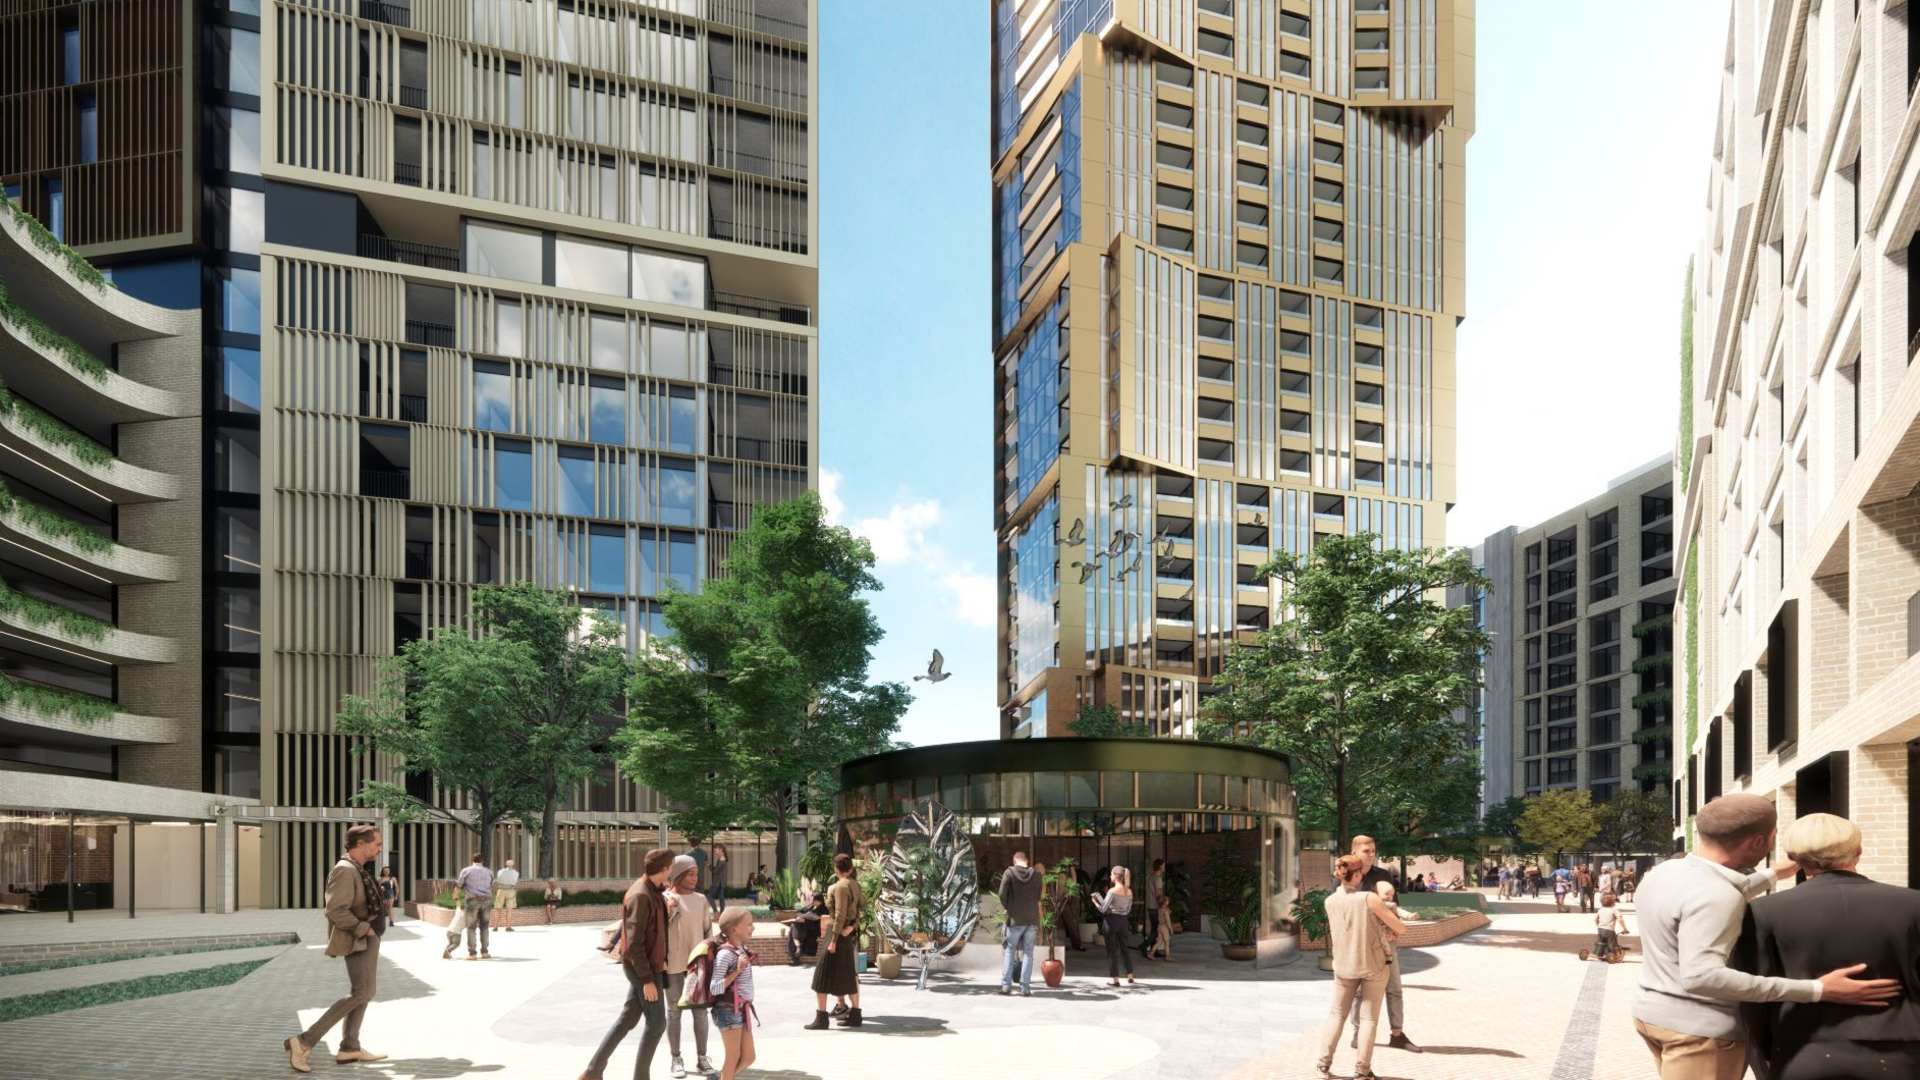 A Multimillion-Dollar Makeover Has Been Proposed for Suburban Icon Northcote Plaza